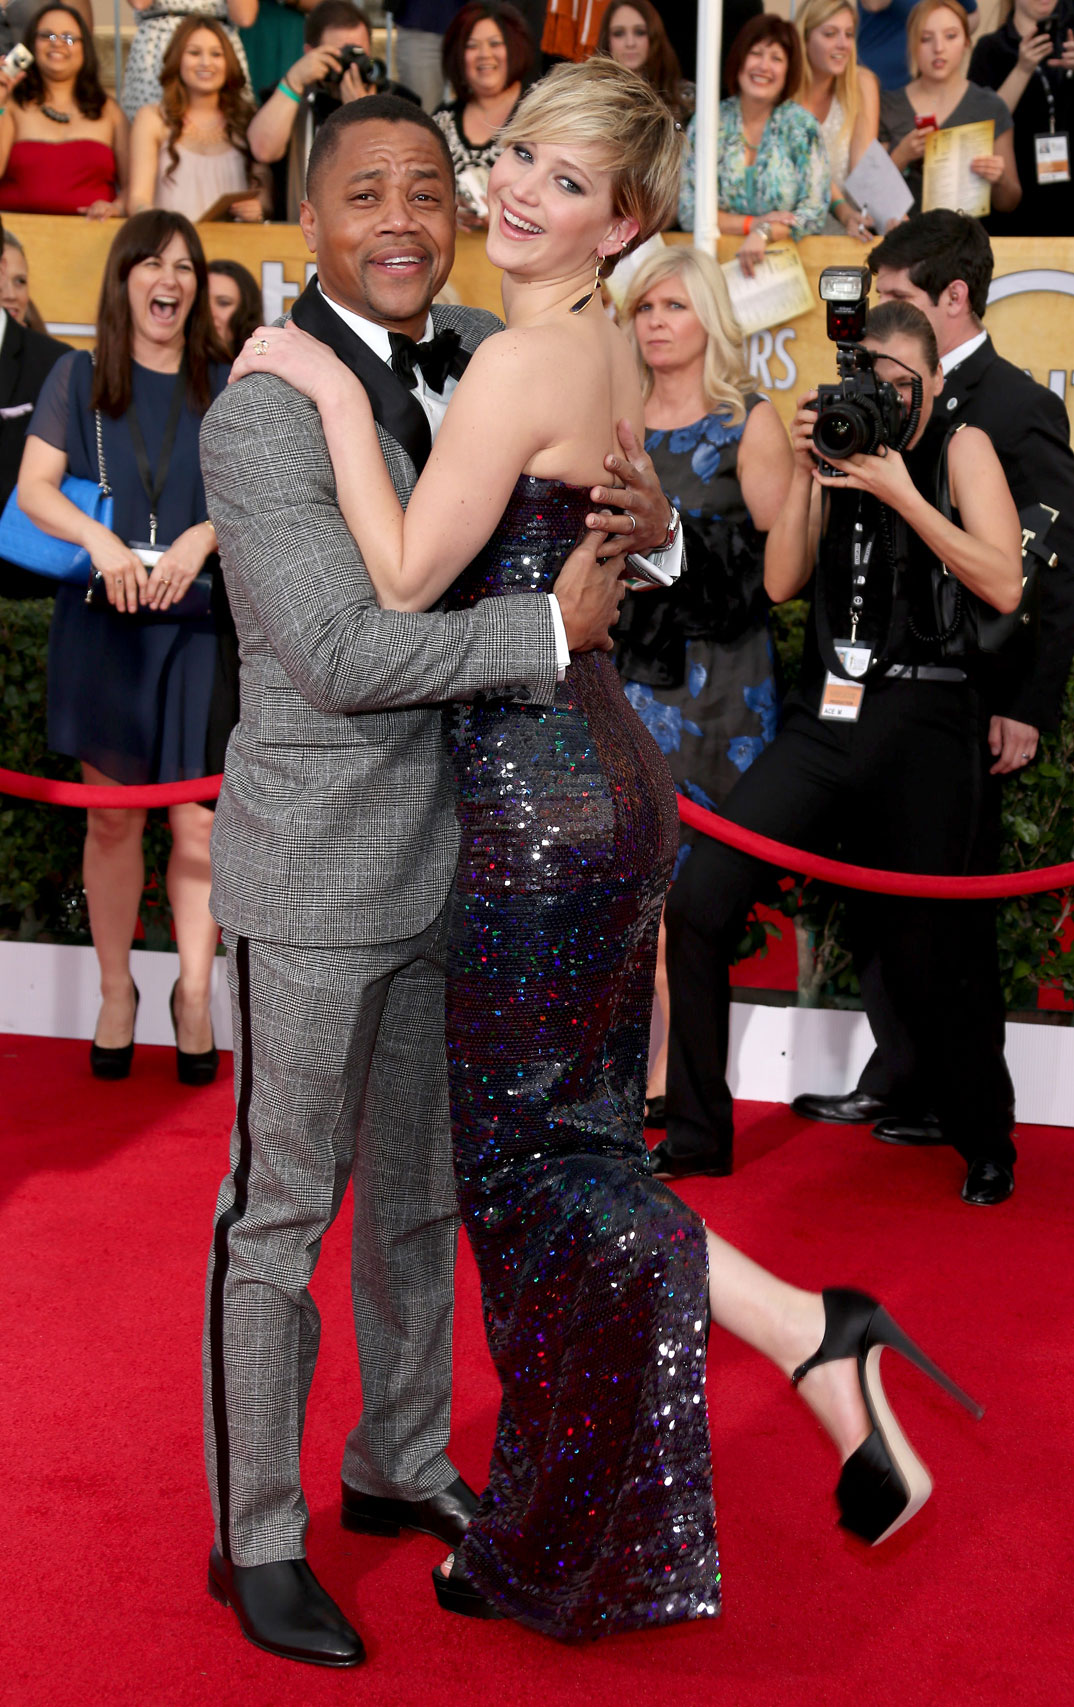 Cuba Gooding Jr. and Jennifer Lawrence arrive at the 20th Annual Screen Actors Guild Awards on January 18, 2014 in Los Angeles, California